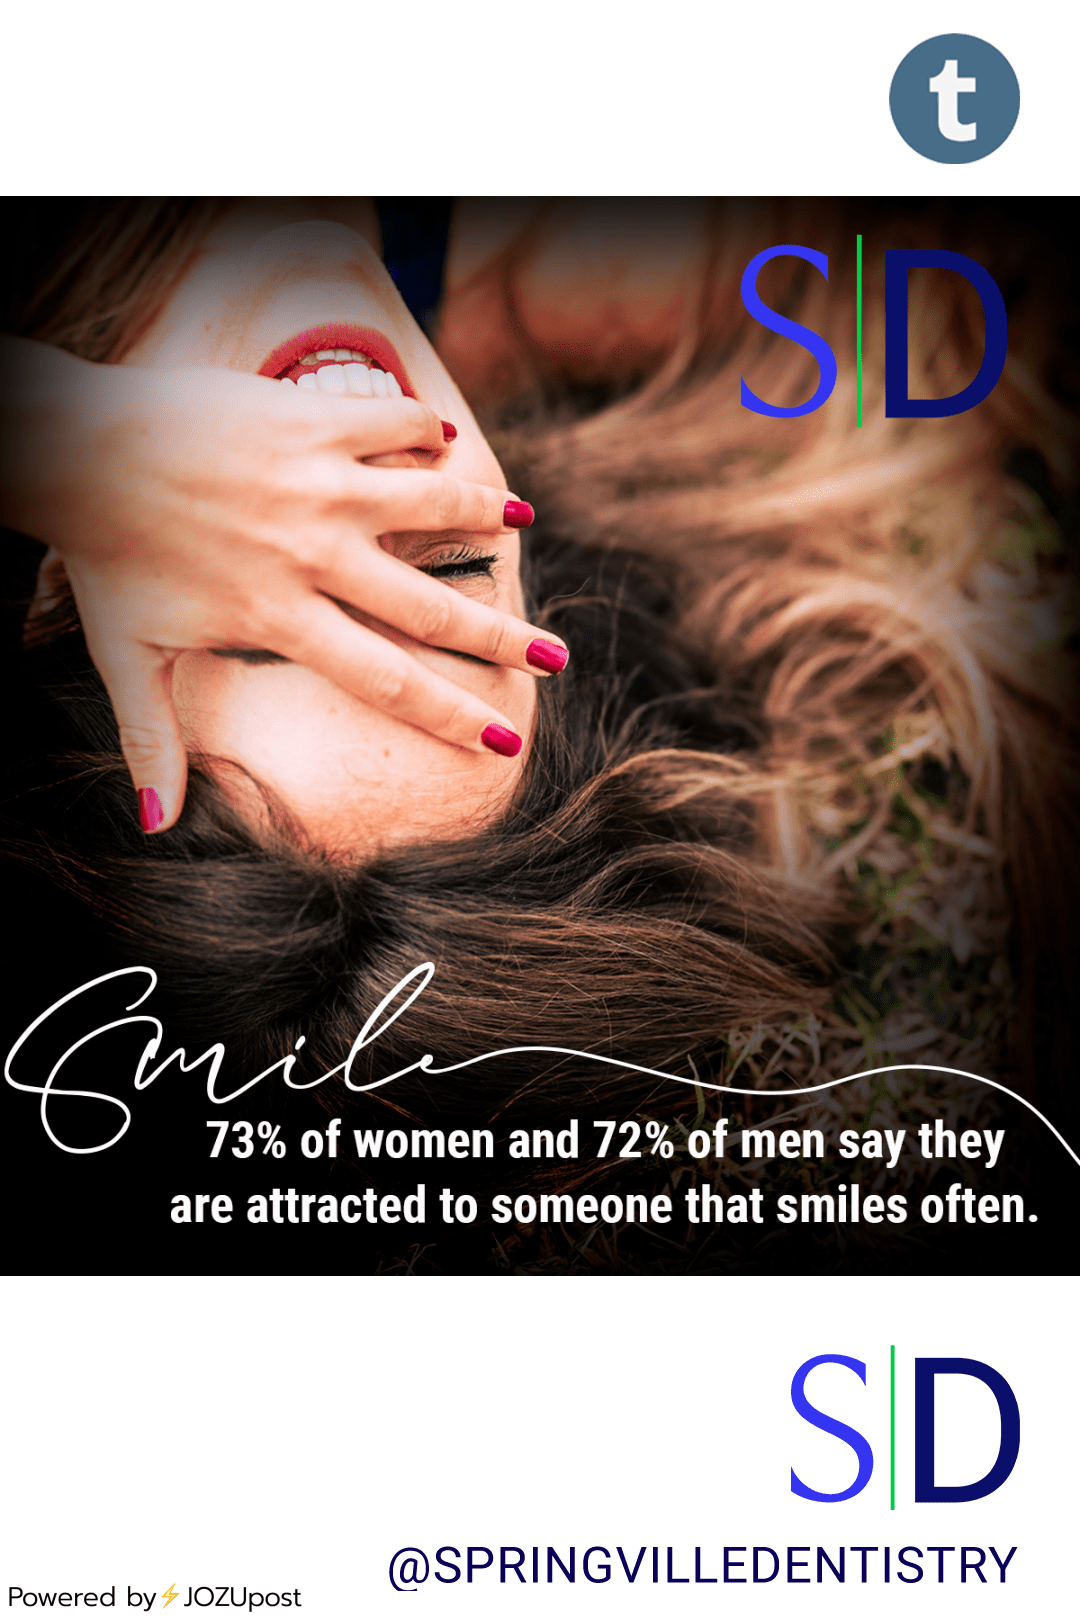 ❤️🤩73% of women and 72% of men say they are attracted to someone that smiles often. 😄😄😄 So…. SMILE!
•
•
•
•
•
•
#increaseyourattractiveness #datinglife